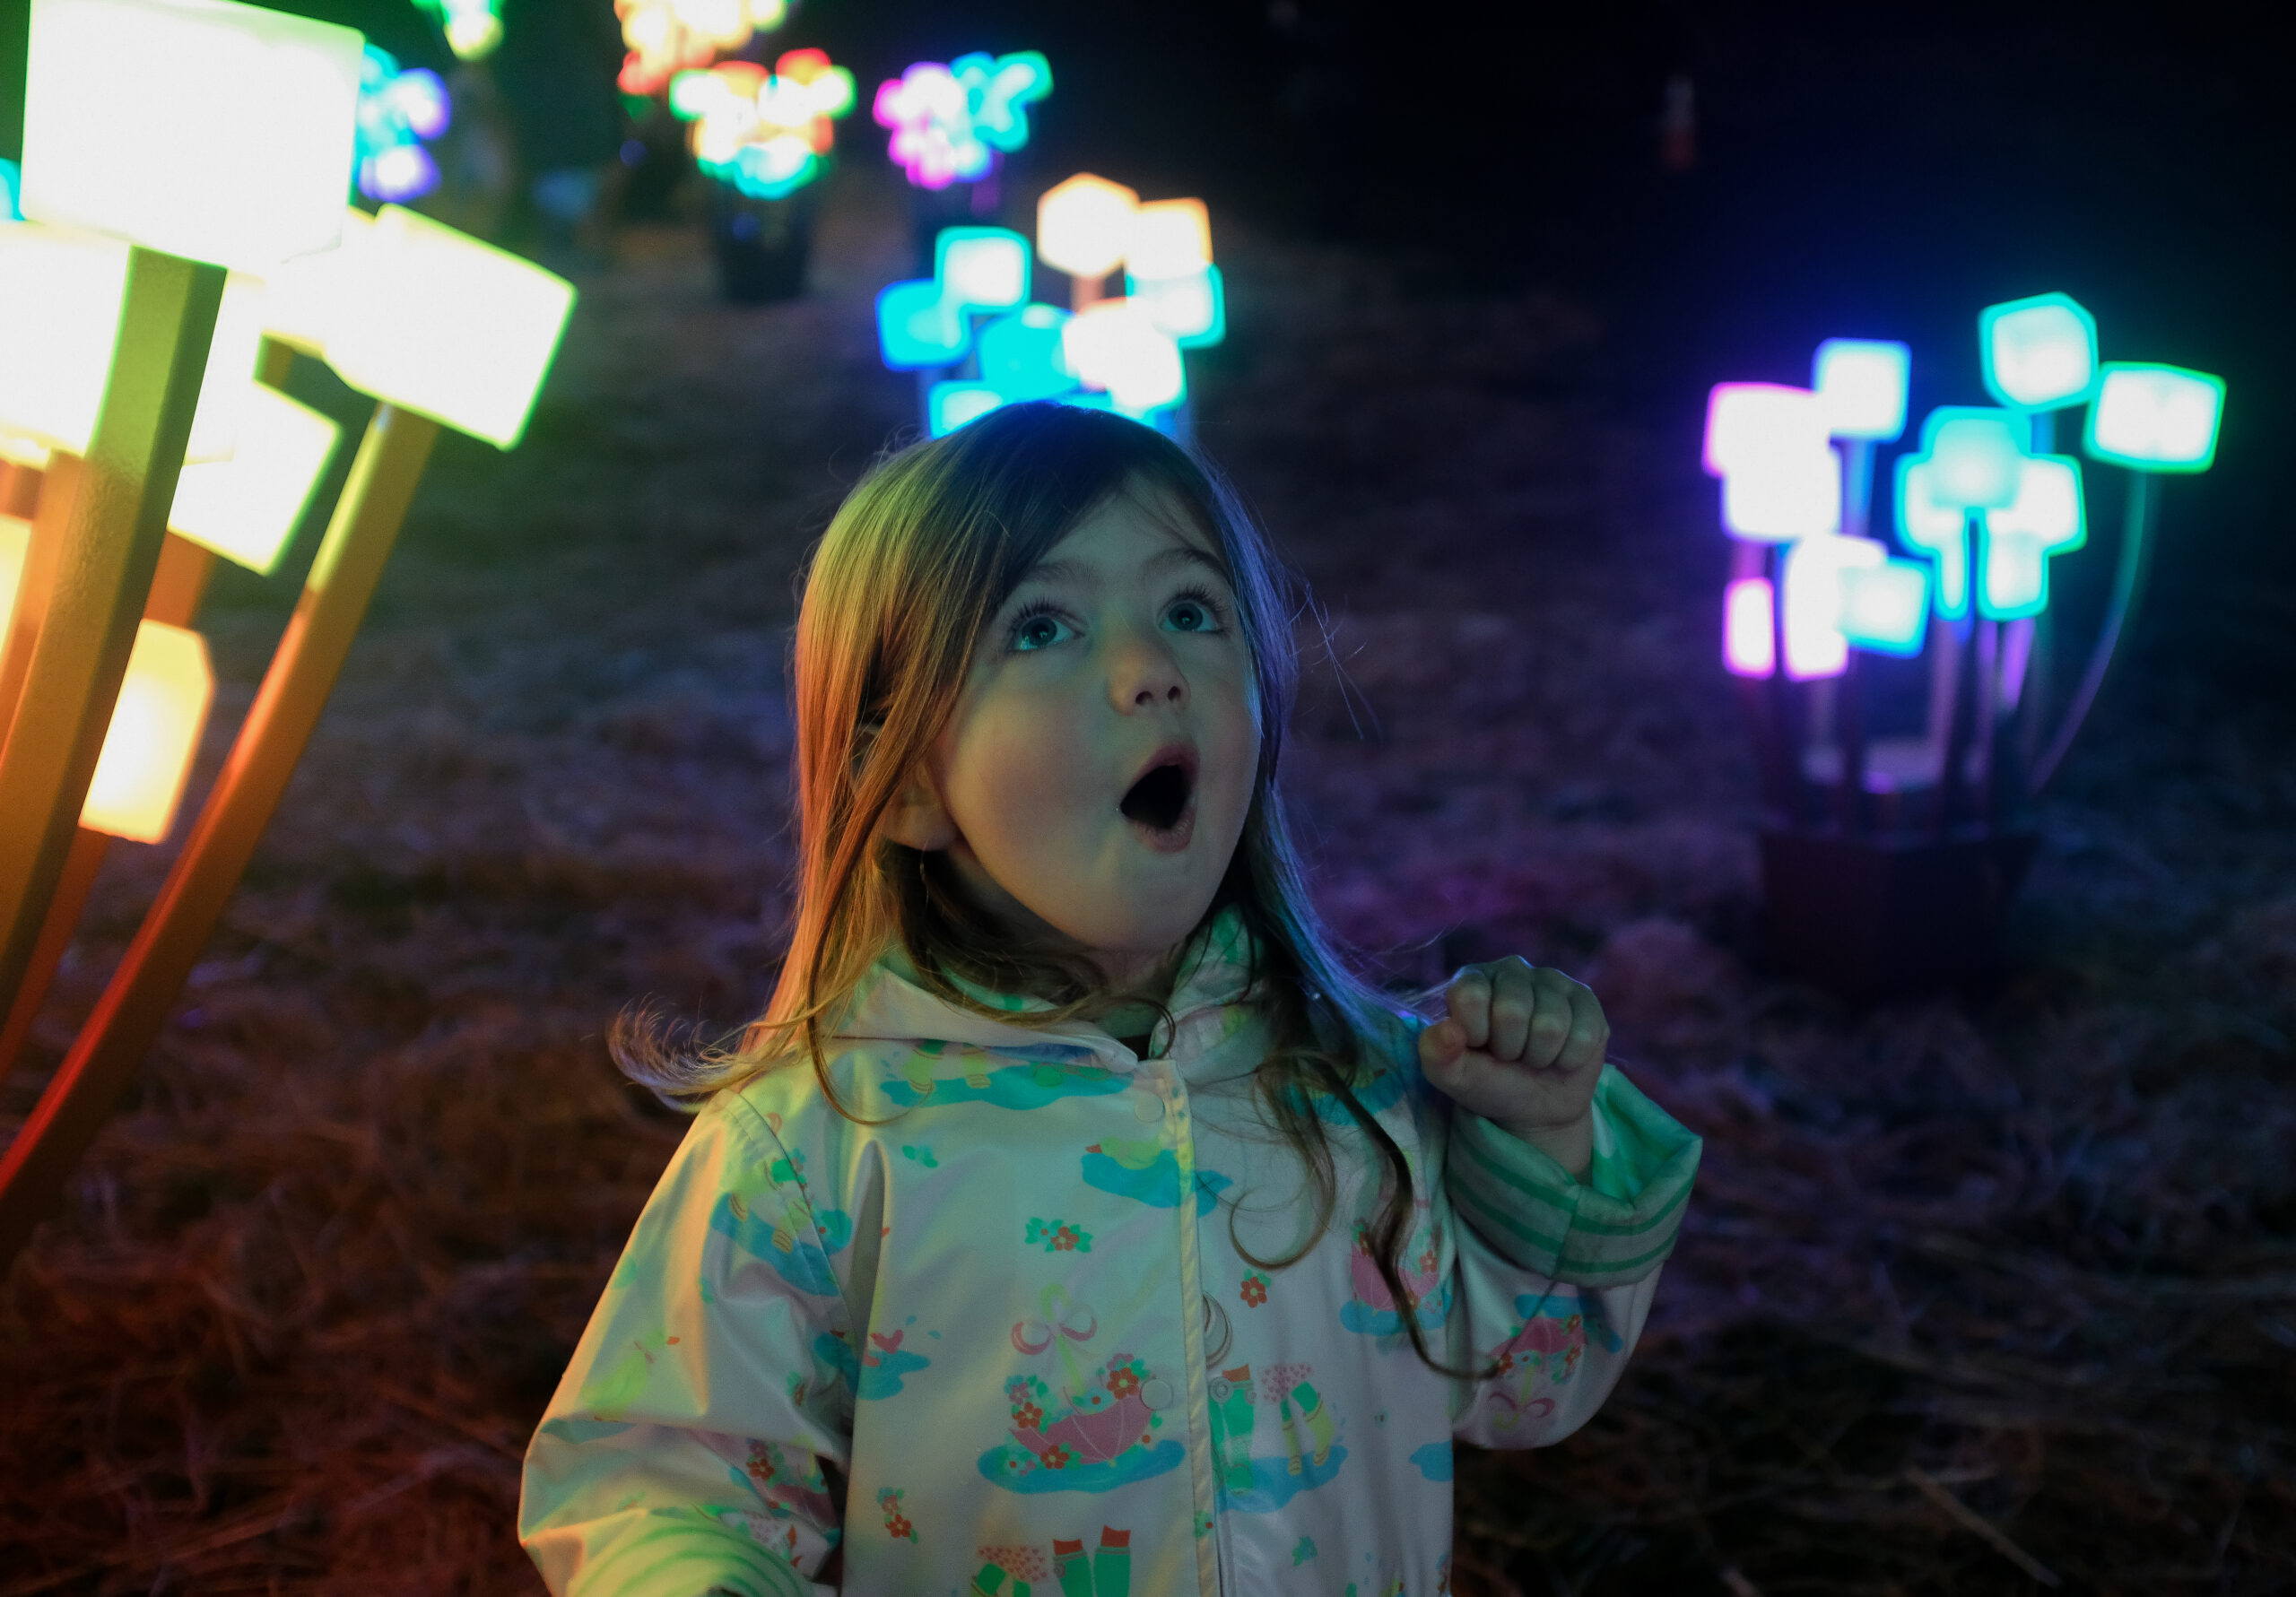 A little girl looks at holiday lights in awe.